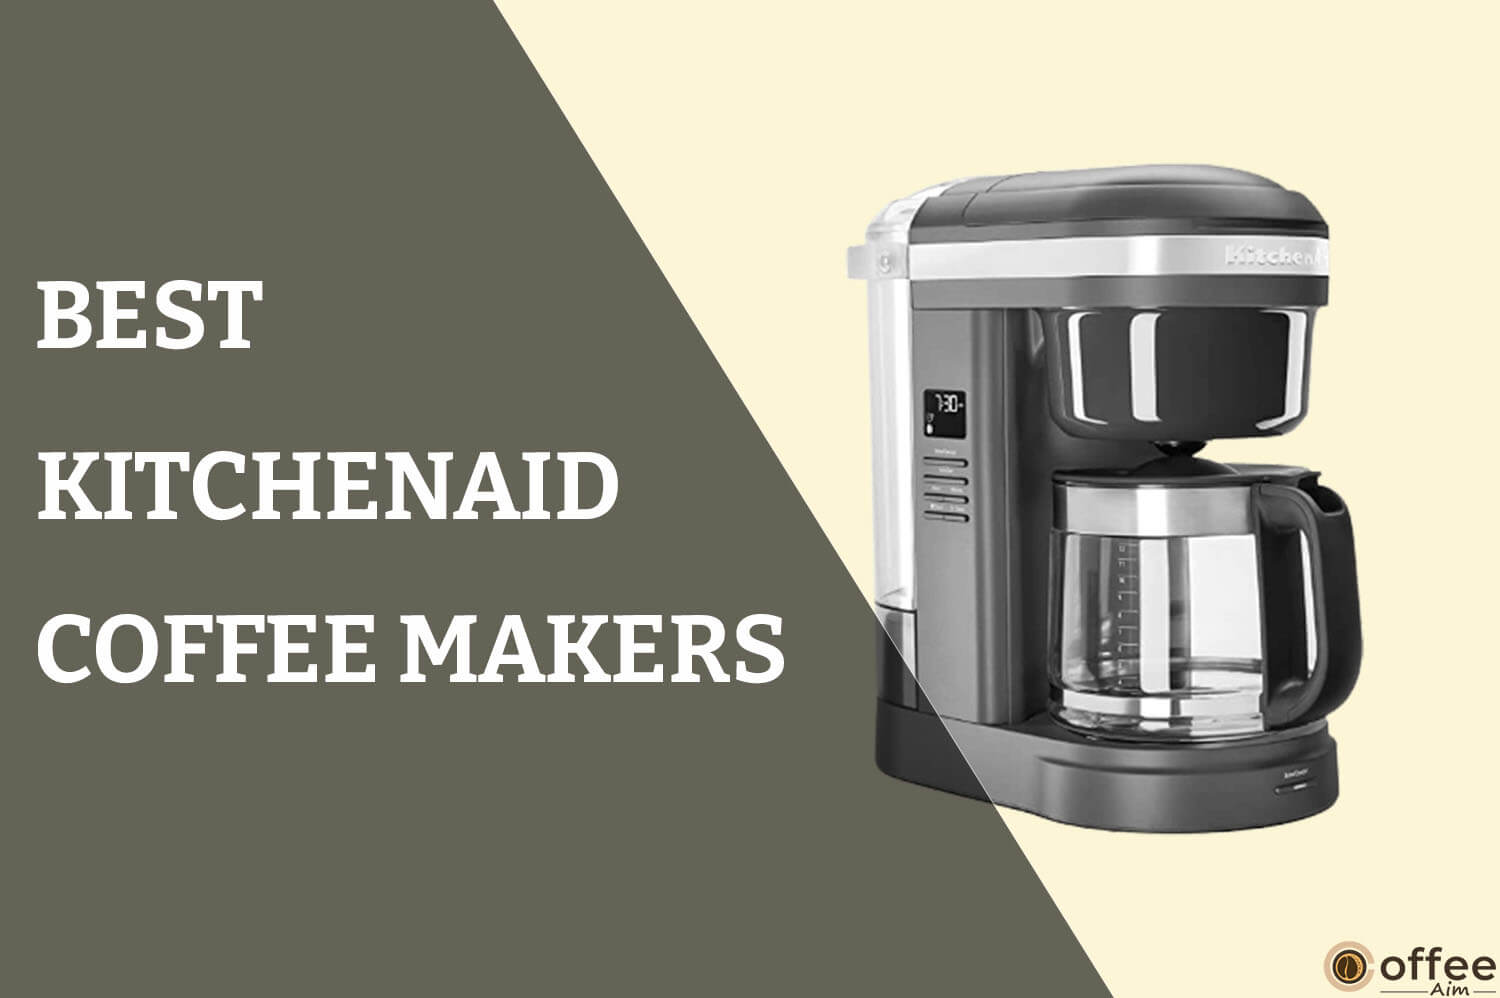 Feature Image for the article "Best Kitcehnaid Coffee Makers"